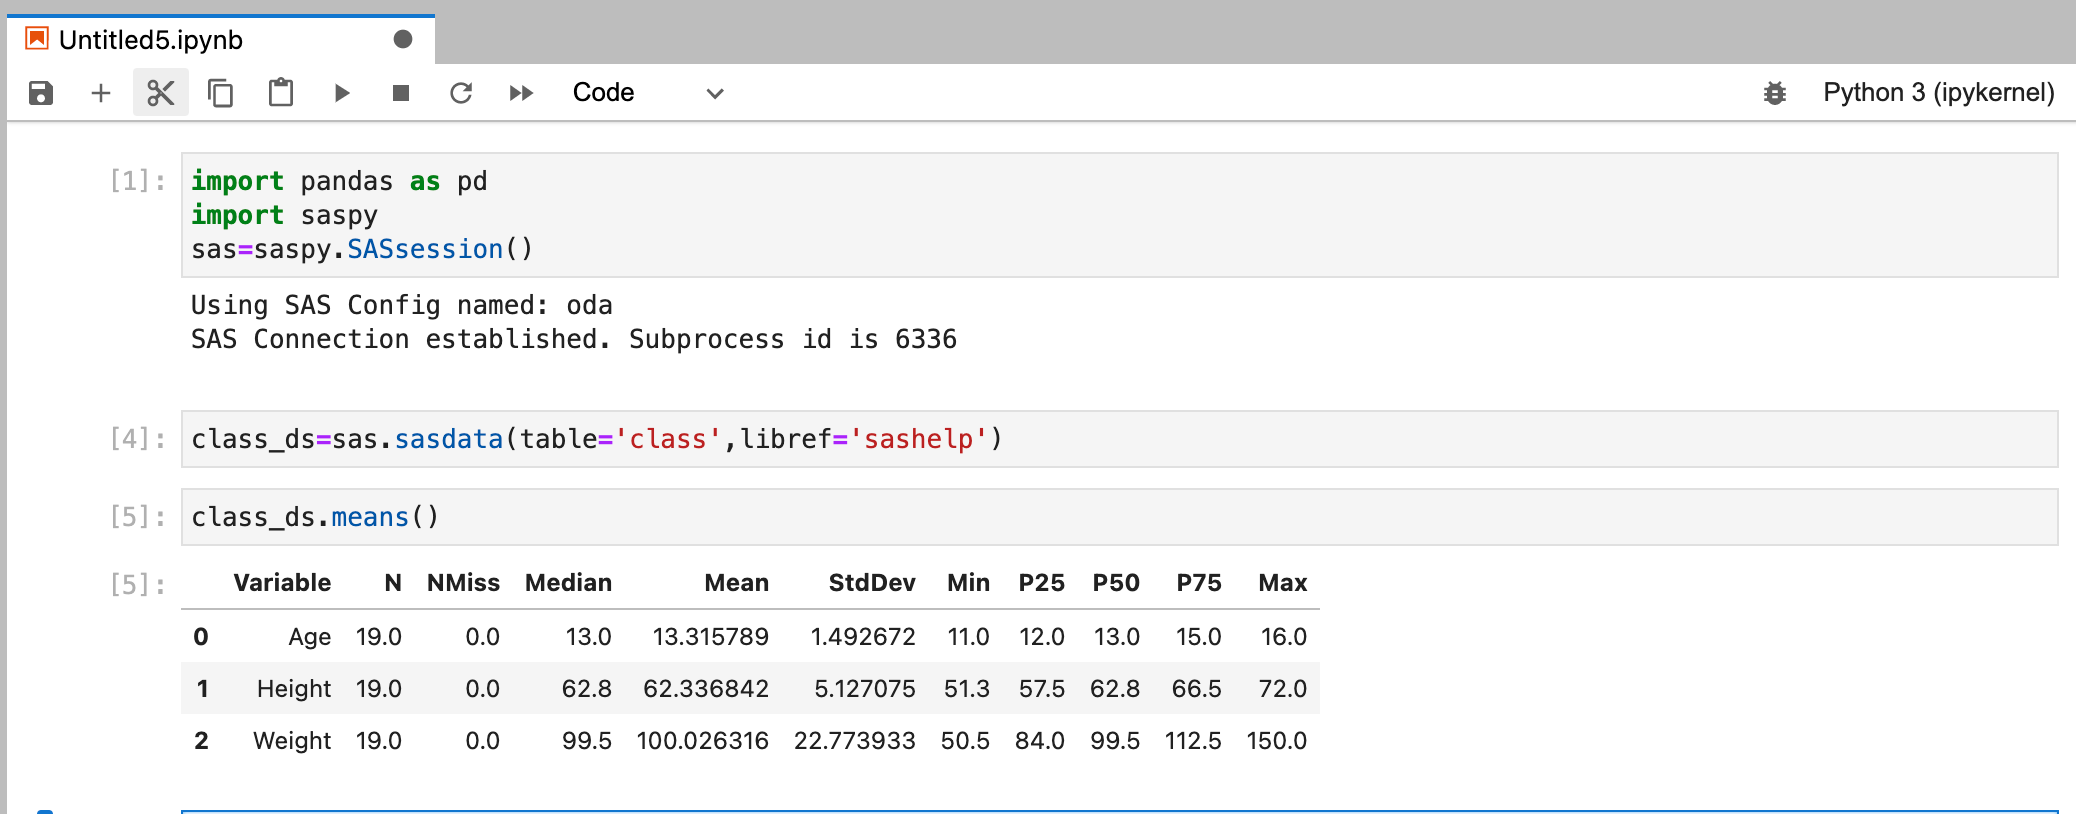 How to Run SAS Programs in Jupyter Notebooks with SASpy?